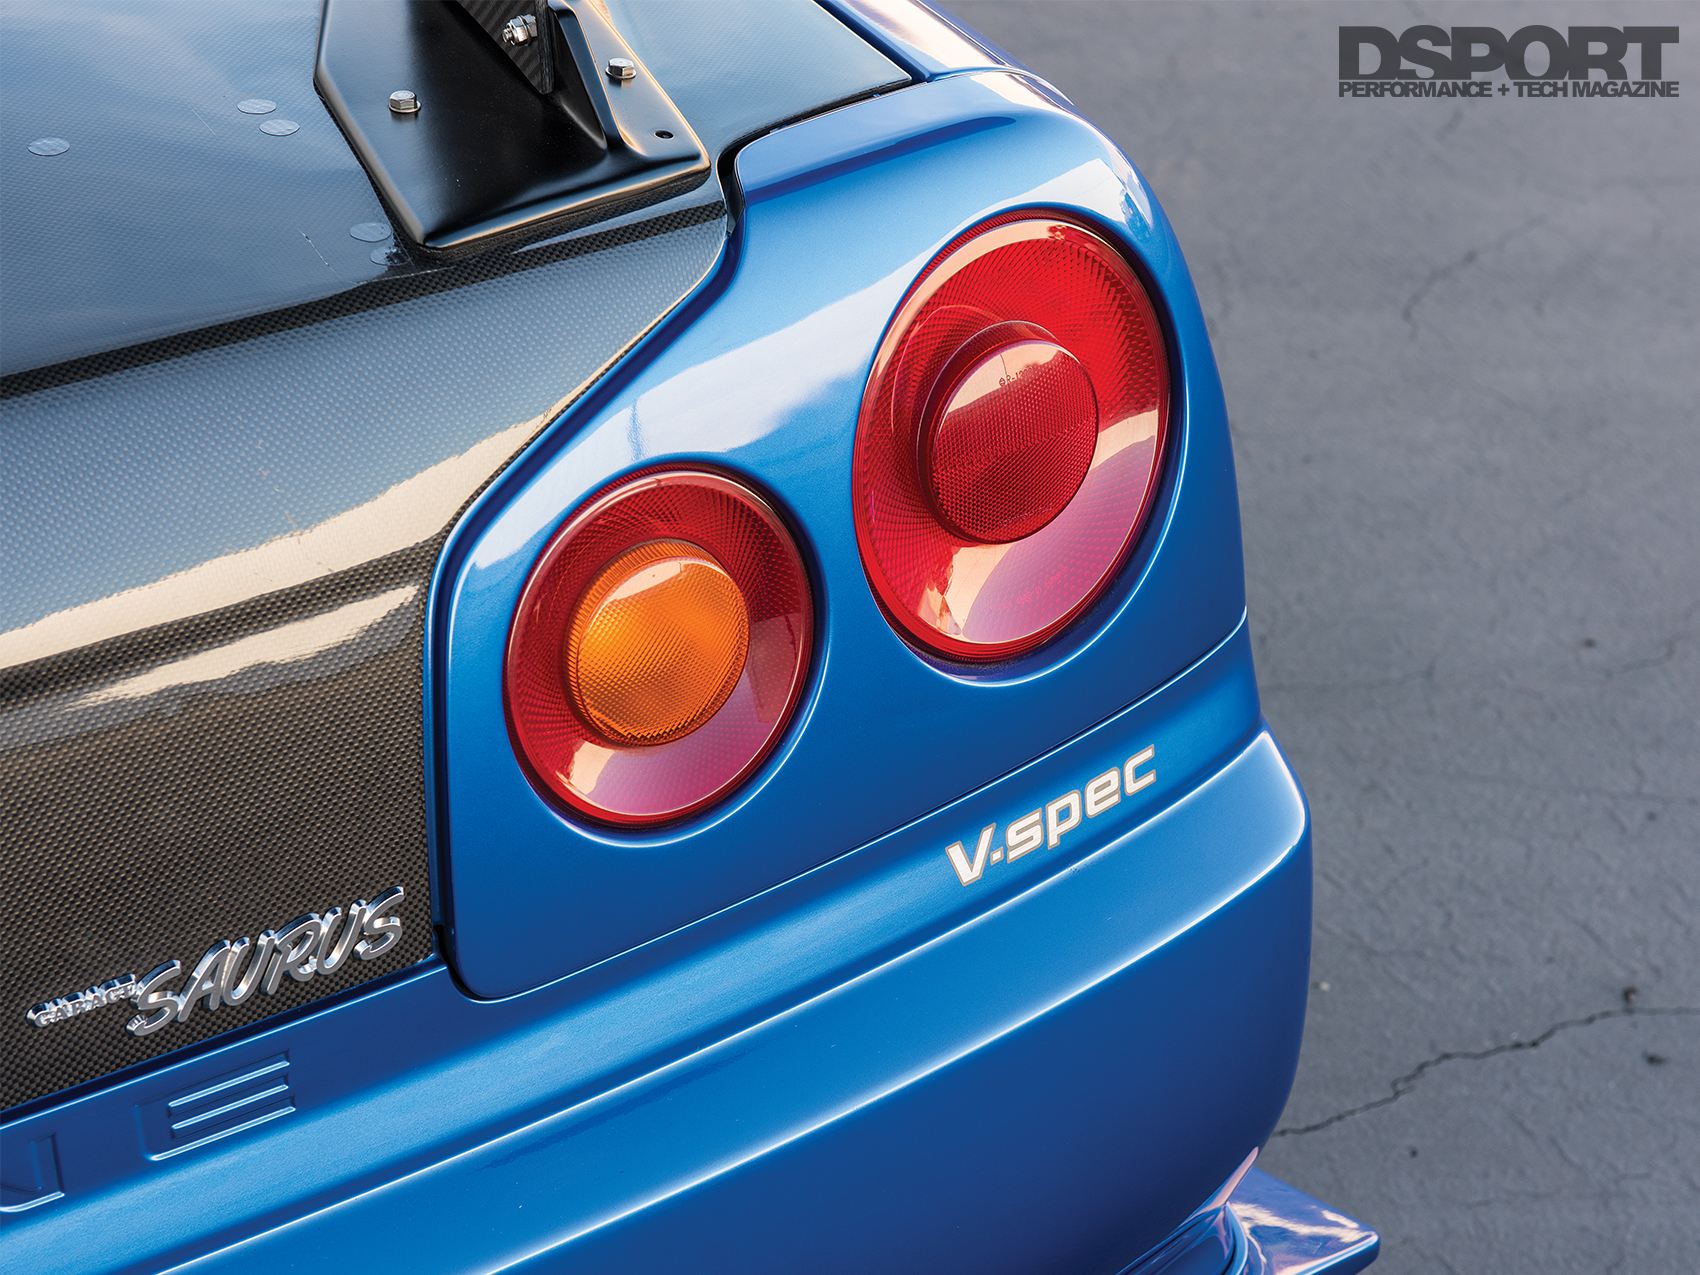 600 Whp Nissan R34 V Spec Page 2 Of 2 Dsport Magazine